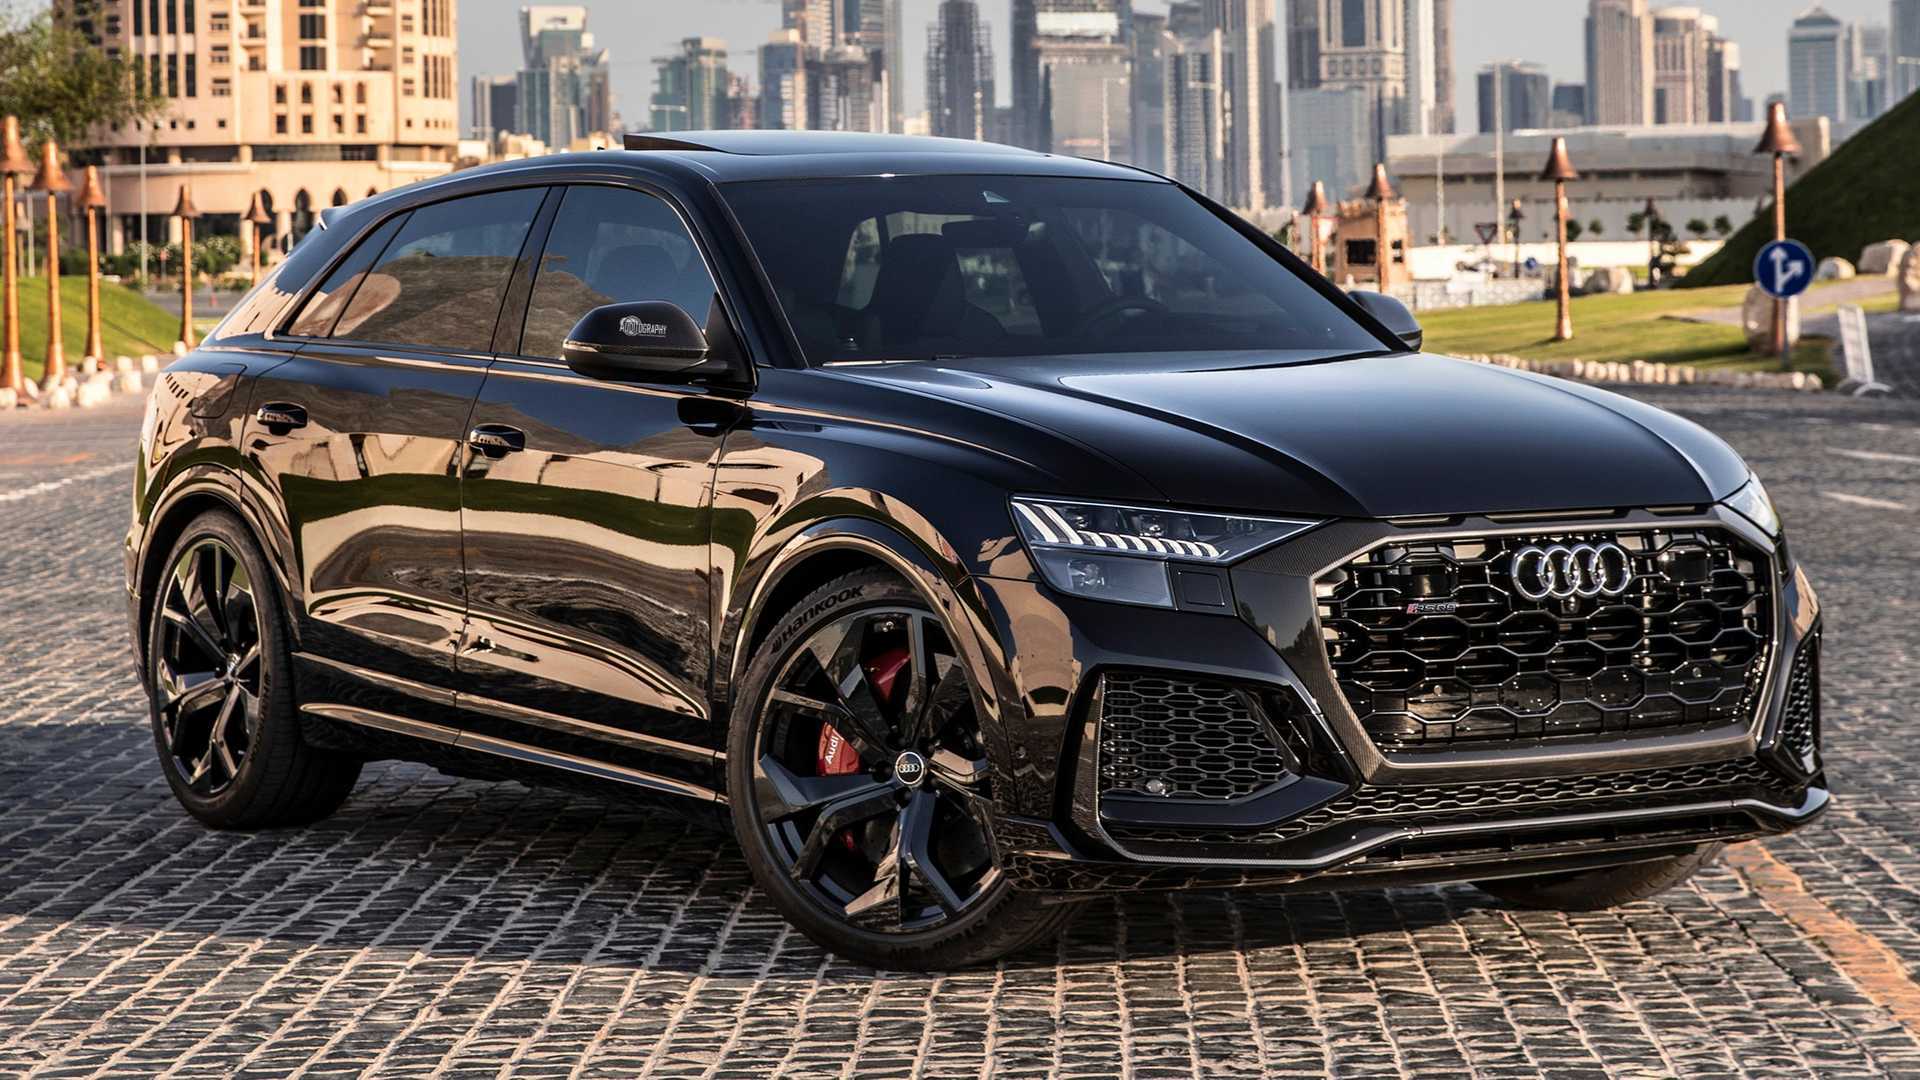 NBA icon Lebron James surprised the world by gifting his son Bronny James an Audi Rs Q8 to celebrate his first NBA title and 18th birthday